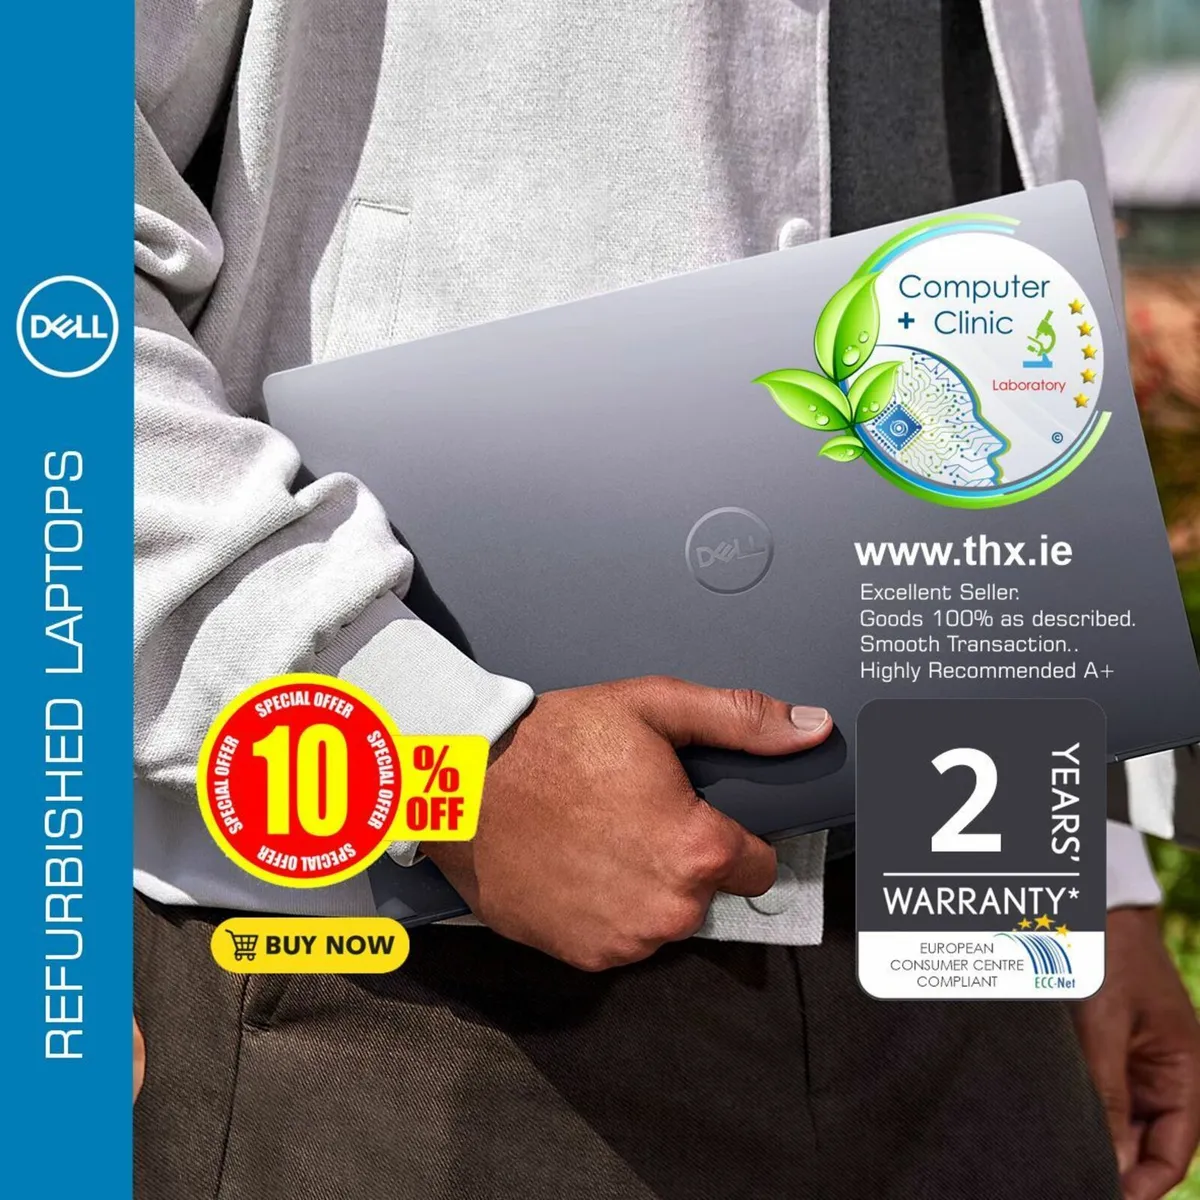 DELL LAPTOPS ON SALE》 GET 10% DISCOUNT - Image 1